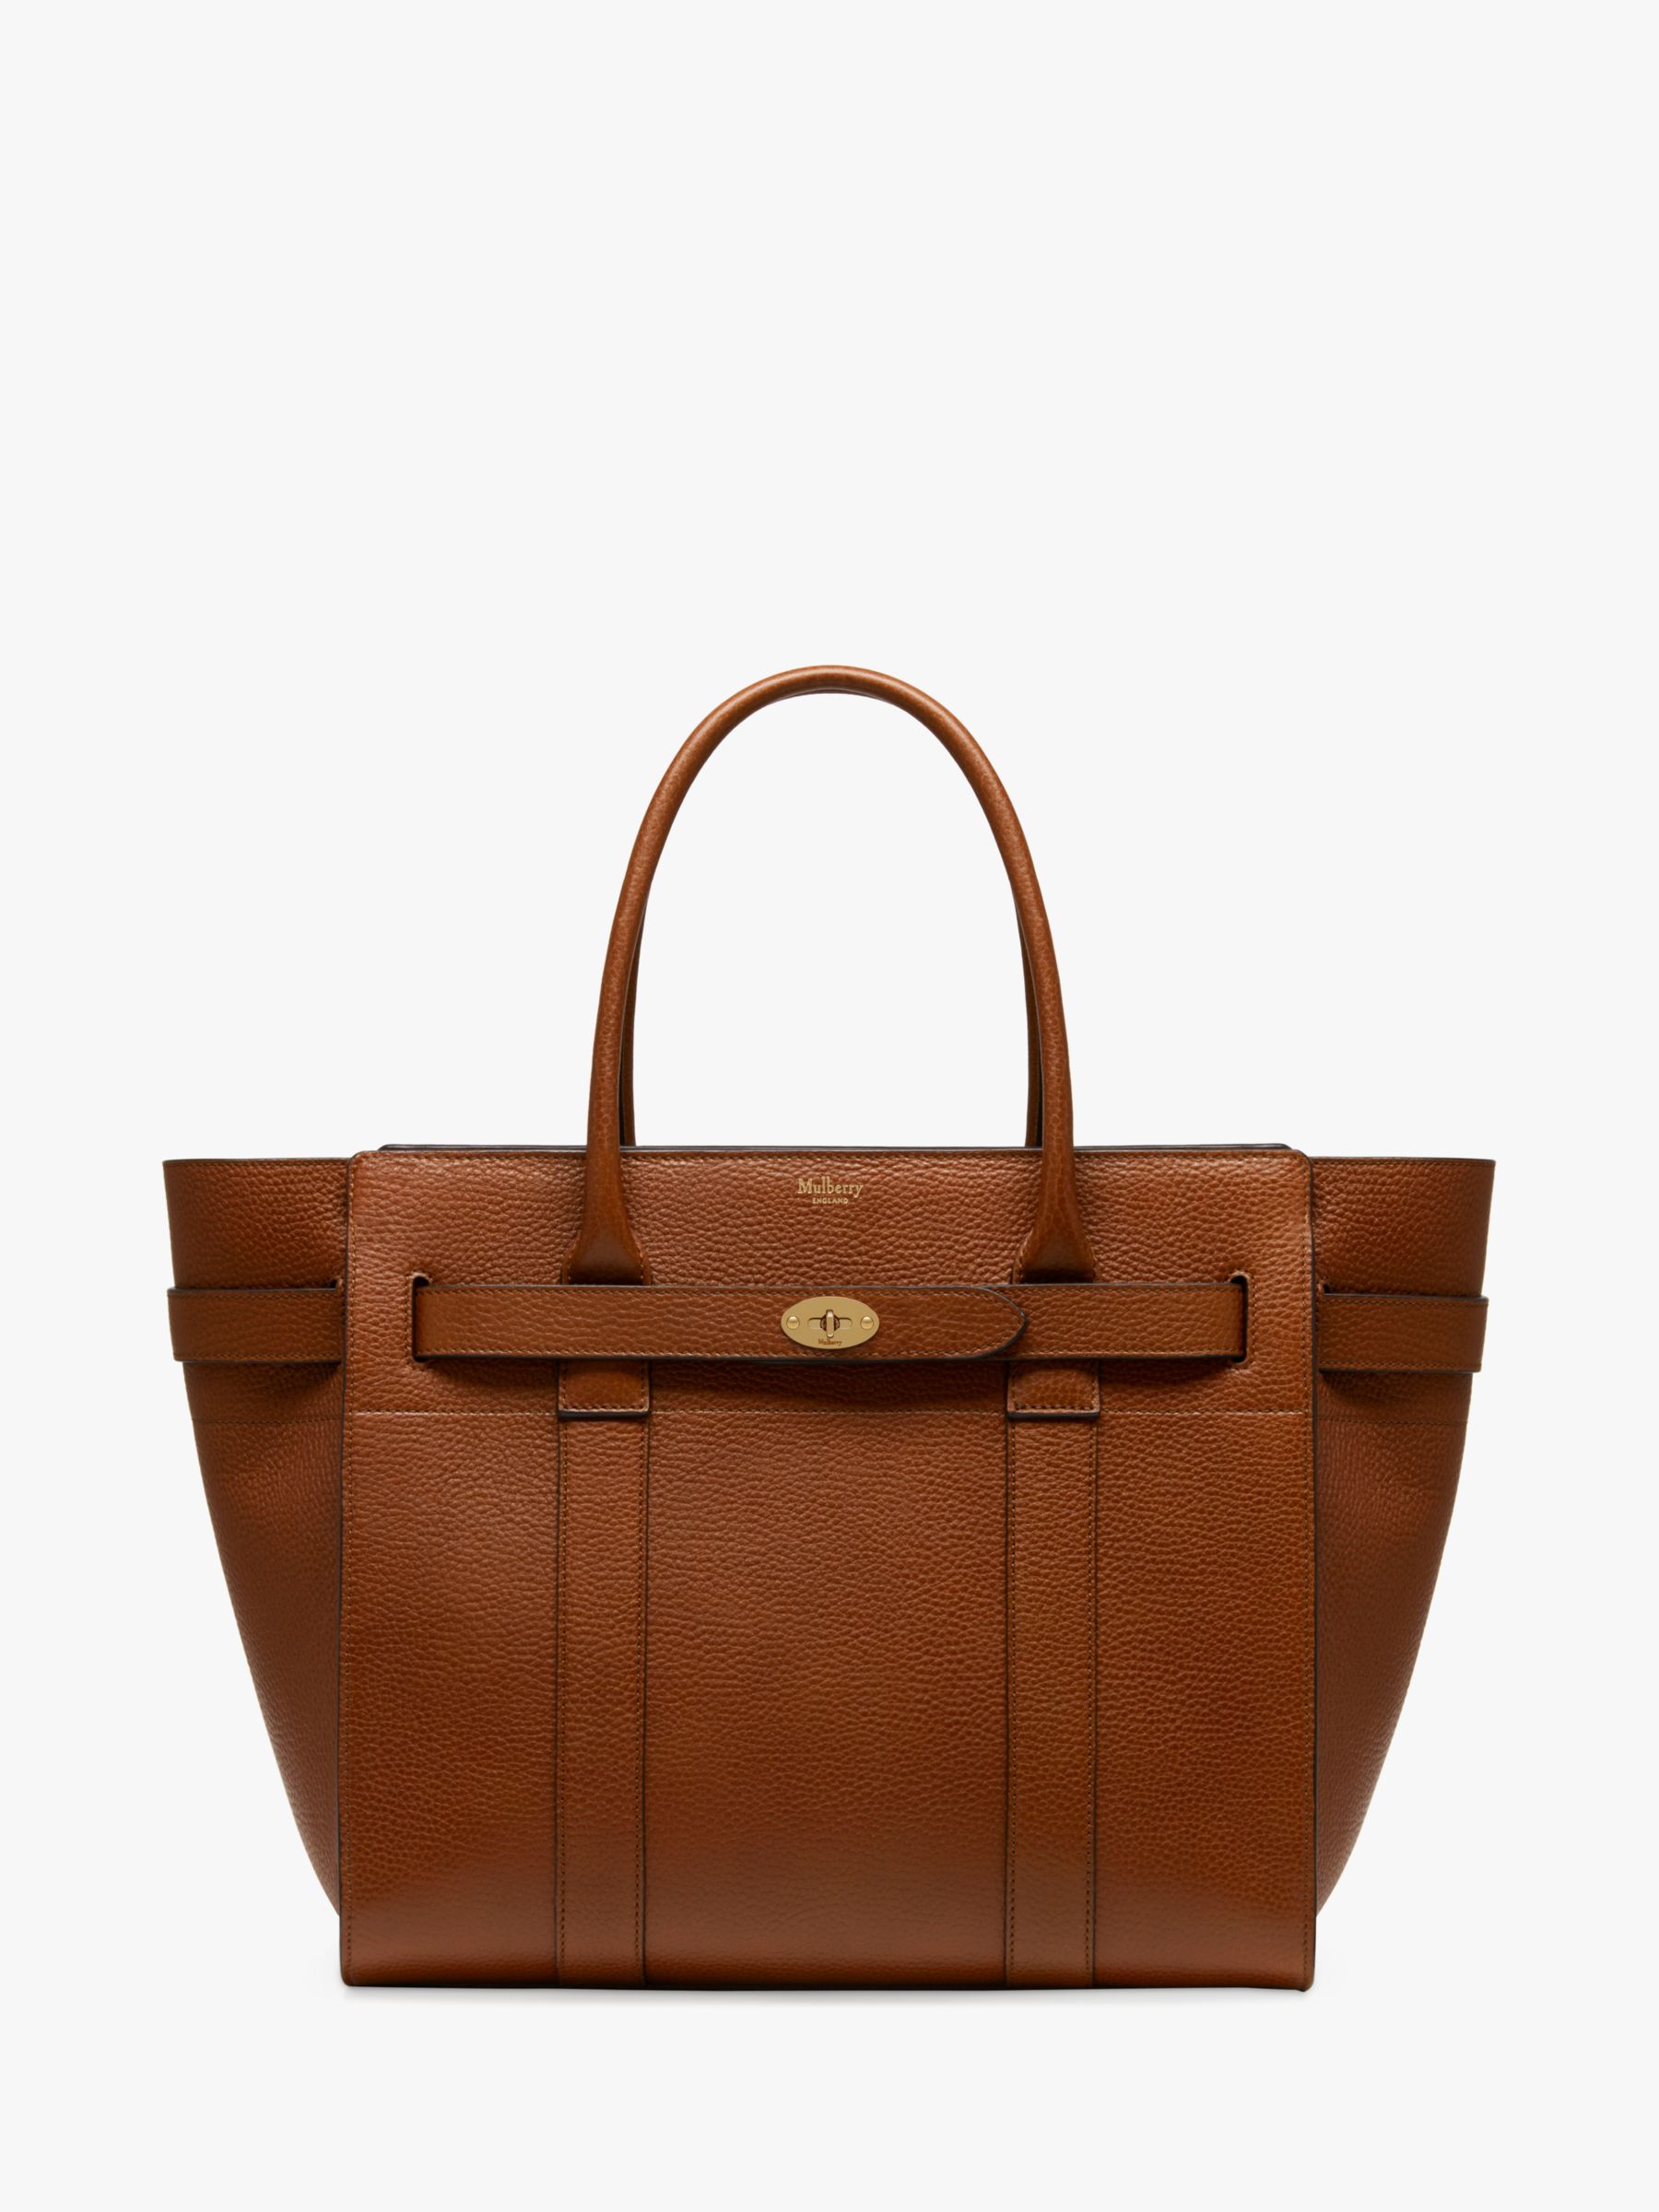 Mulberry Bayswater Zipped Grain Veg Tanned Leather Tote Bag